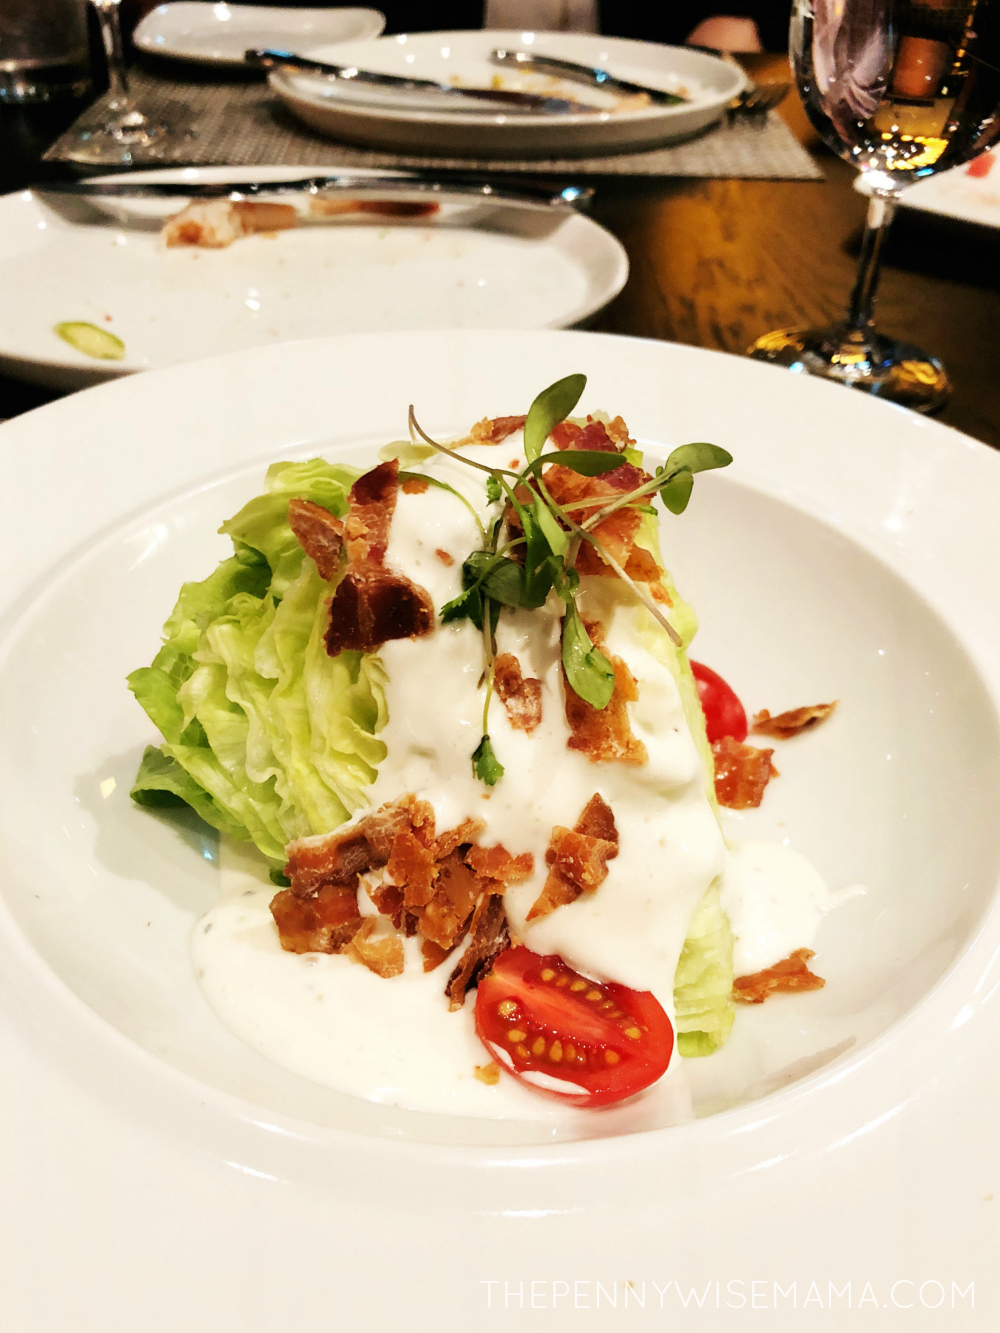 Royal Caribbean Symphony of the Seas - Chops Grille - Wedge Salad